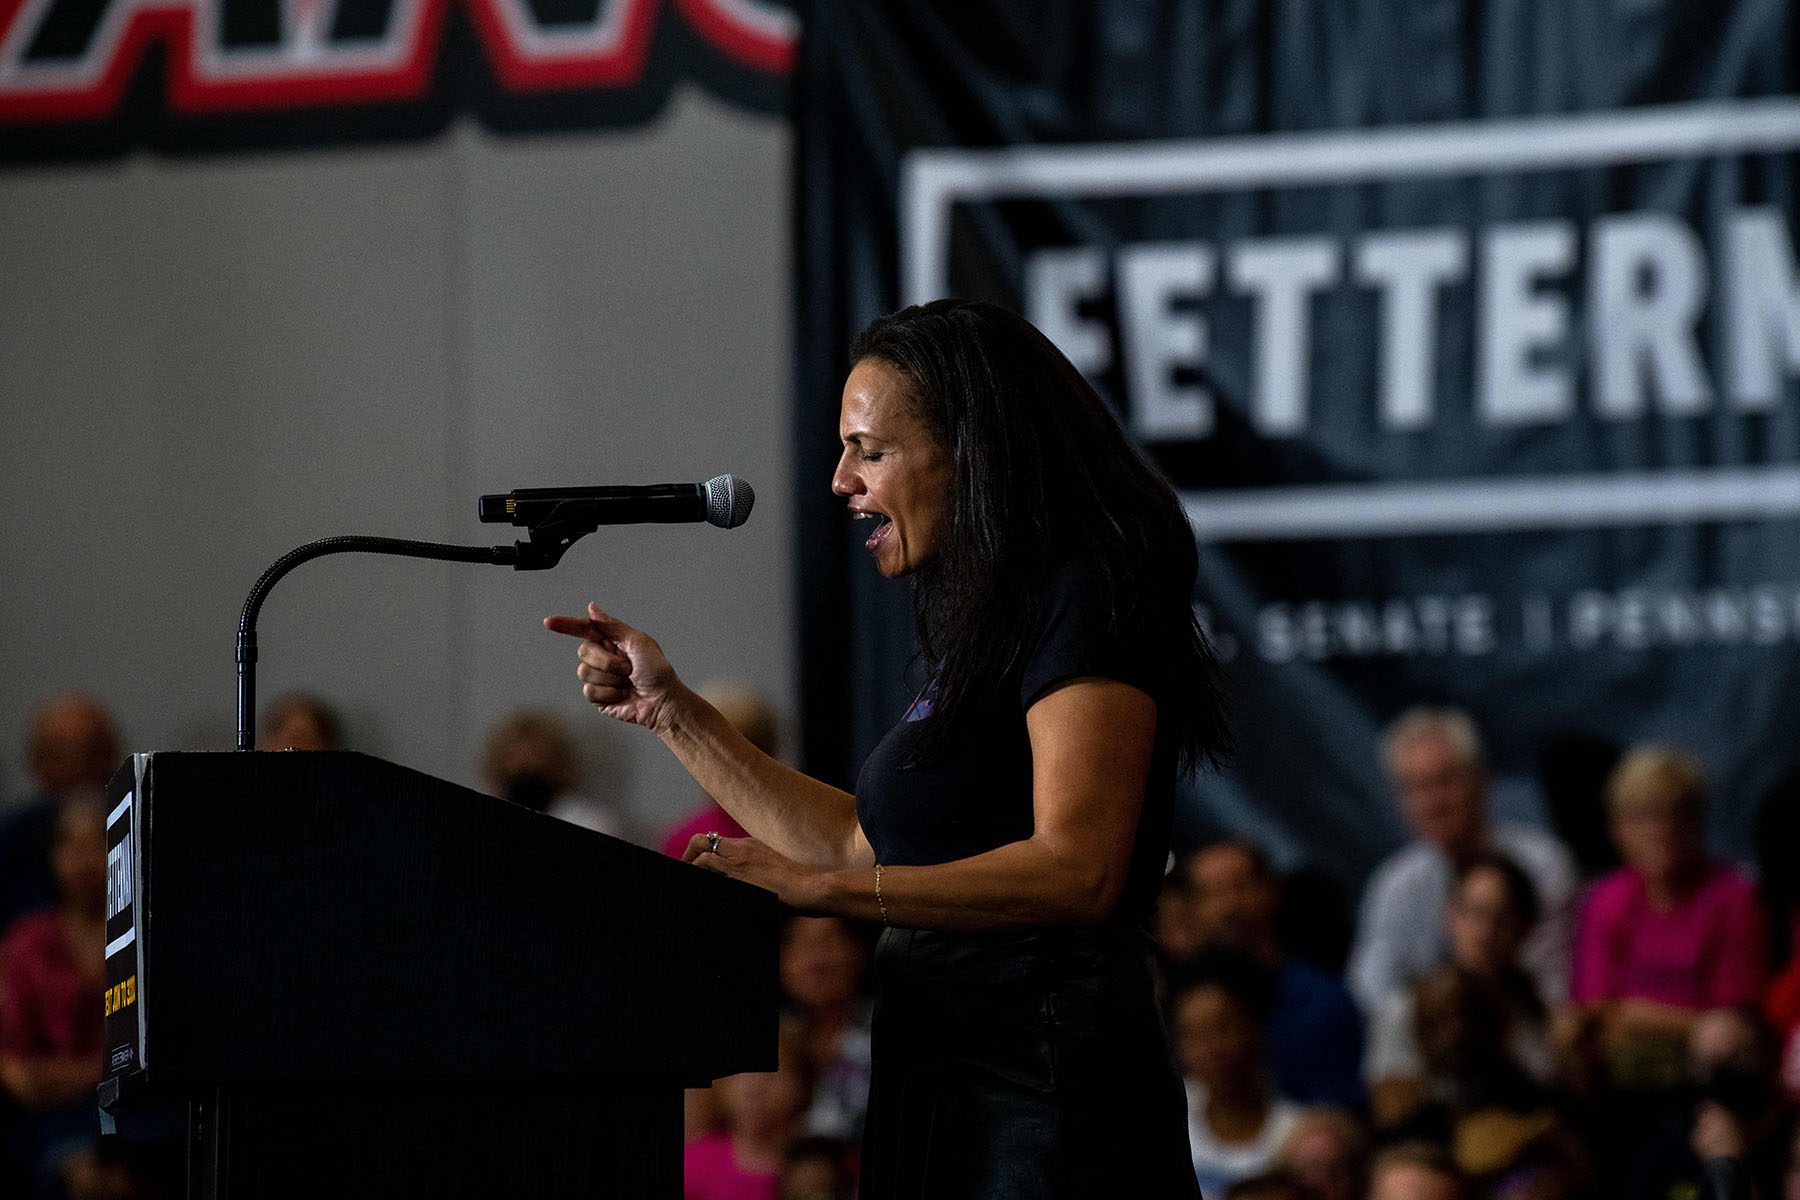 Alexis McGill Johnson speaks at a podium during a "Women For Fetterman" rally.